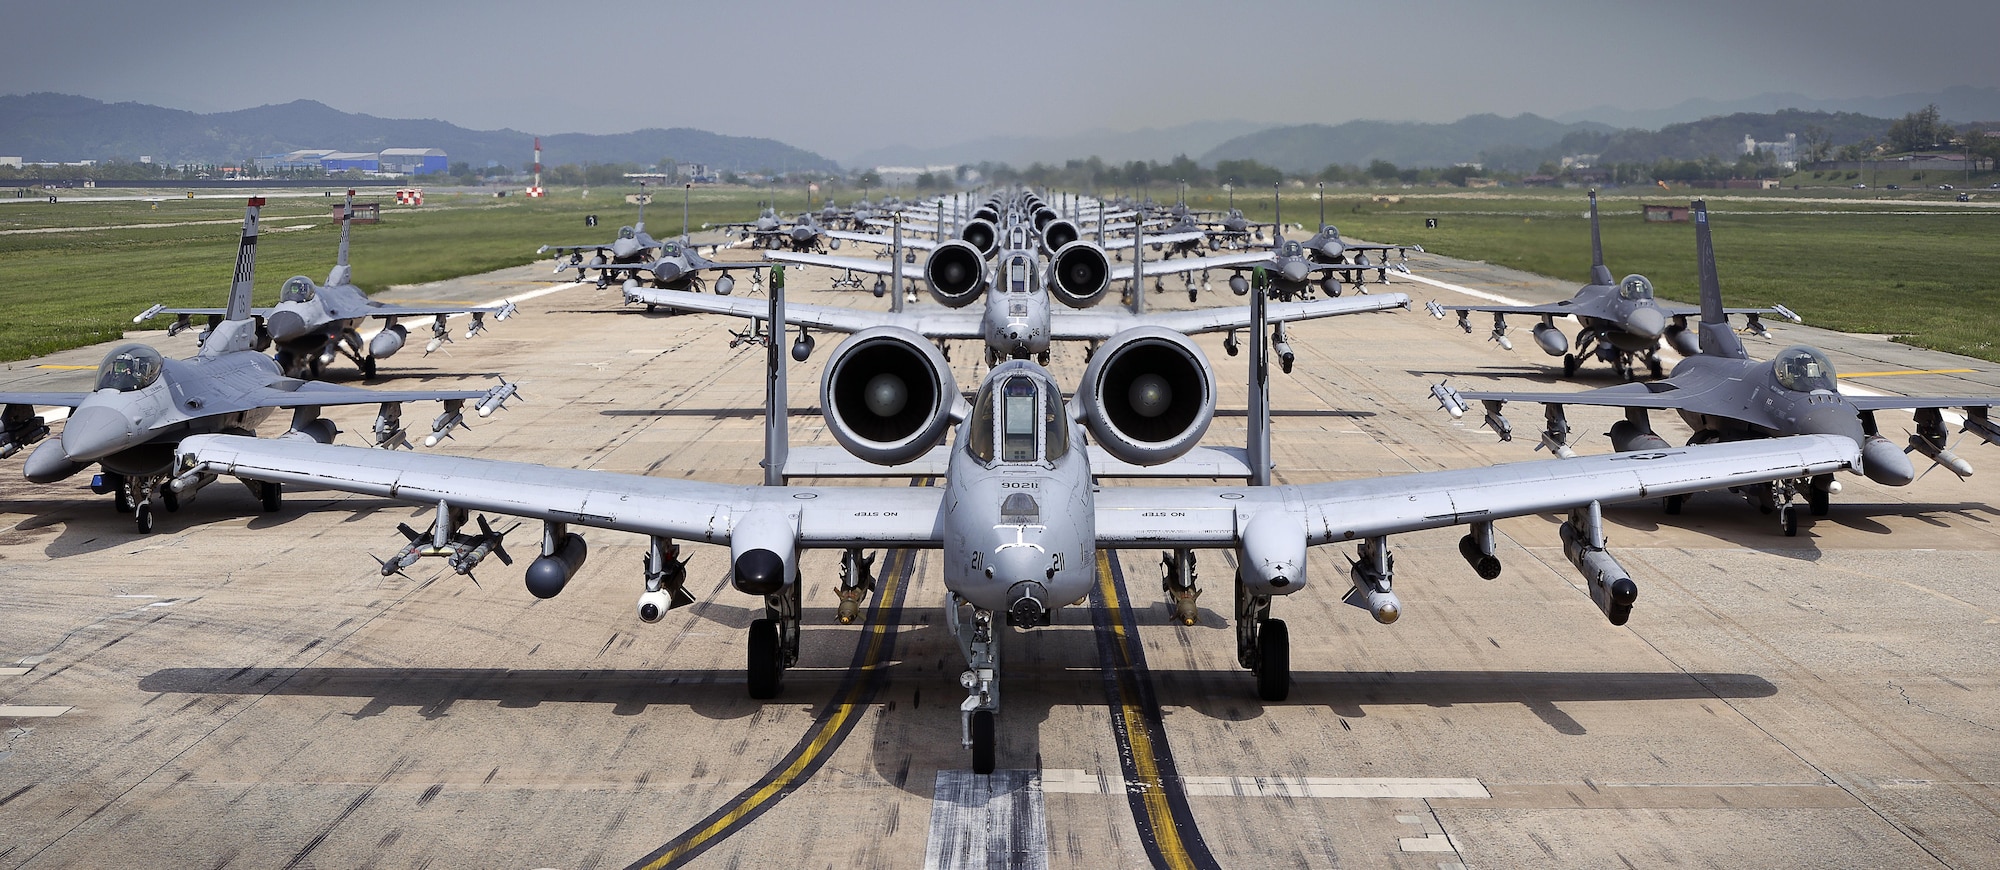 A-10 Thunderbolt II and F-16 Fighting Falcon fighter aircraft perform an 'Elephant Walk' on the runway this week during Exercise Beverly Herd 16-01 at Osan Air Base, Republic of Korea.  The Elephant Walk was a demonstration of U.S. Air Force capabilities and strength and showcases the wing's ability to generate combat airpower in an expedient manner in order to respond to simulated contingency operations. The A-10 Thunderbolt II aircraft are from the 25th Fighter Squadron "Draggins" and the F-16 Fighting Falcon aircraft are from the 36th Fighter Squadron "Fiends" of the 51st Fighter Wing, Osan AB, ROK; the additional F-16 aircraft are from the 179th Fighter Squadron "Bulldogs" of the 148th Fighter Wing out of Duluth Air National Guard Base, Minnesota. (U.S. Air Force photo by Tech. Sgt. Travis Edwards/Released)